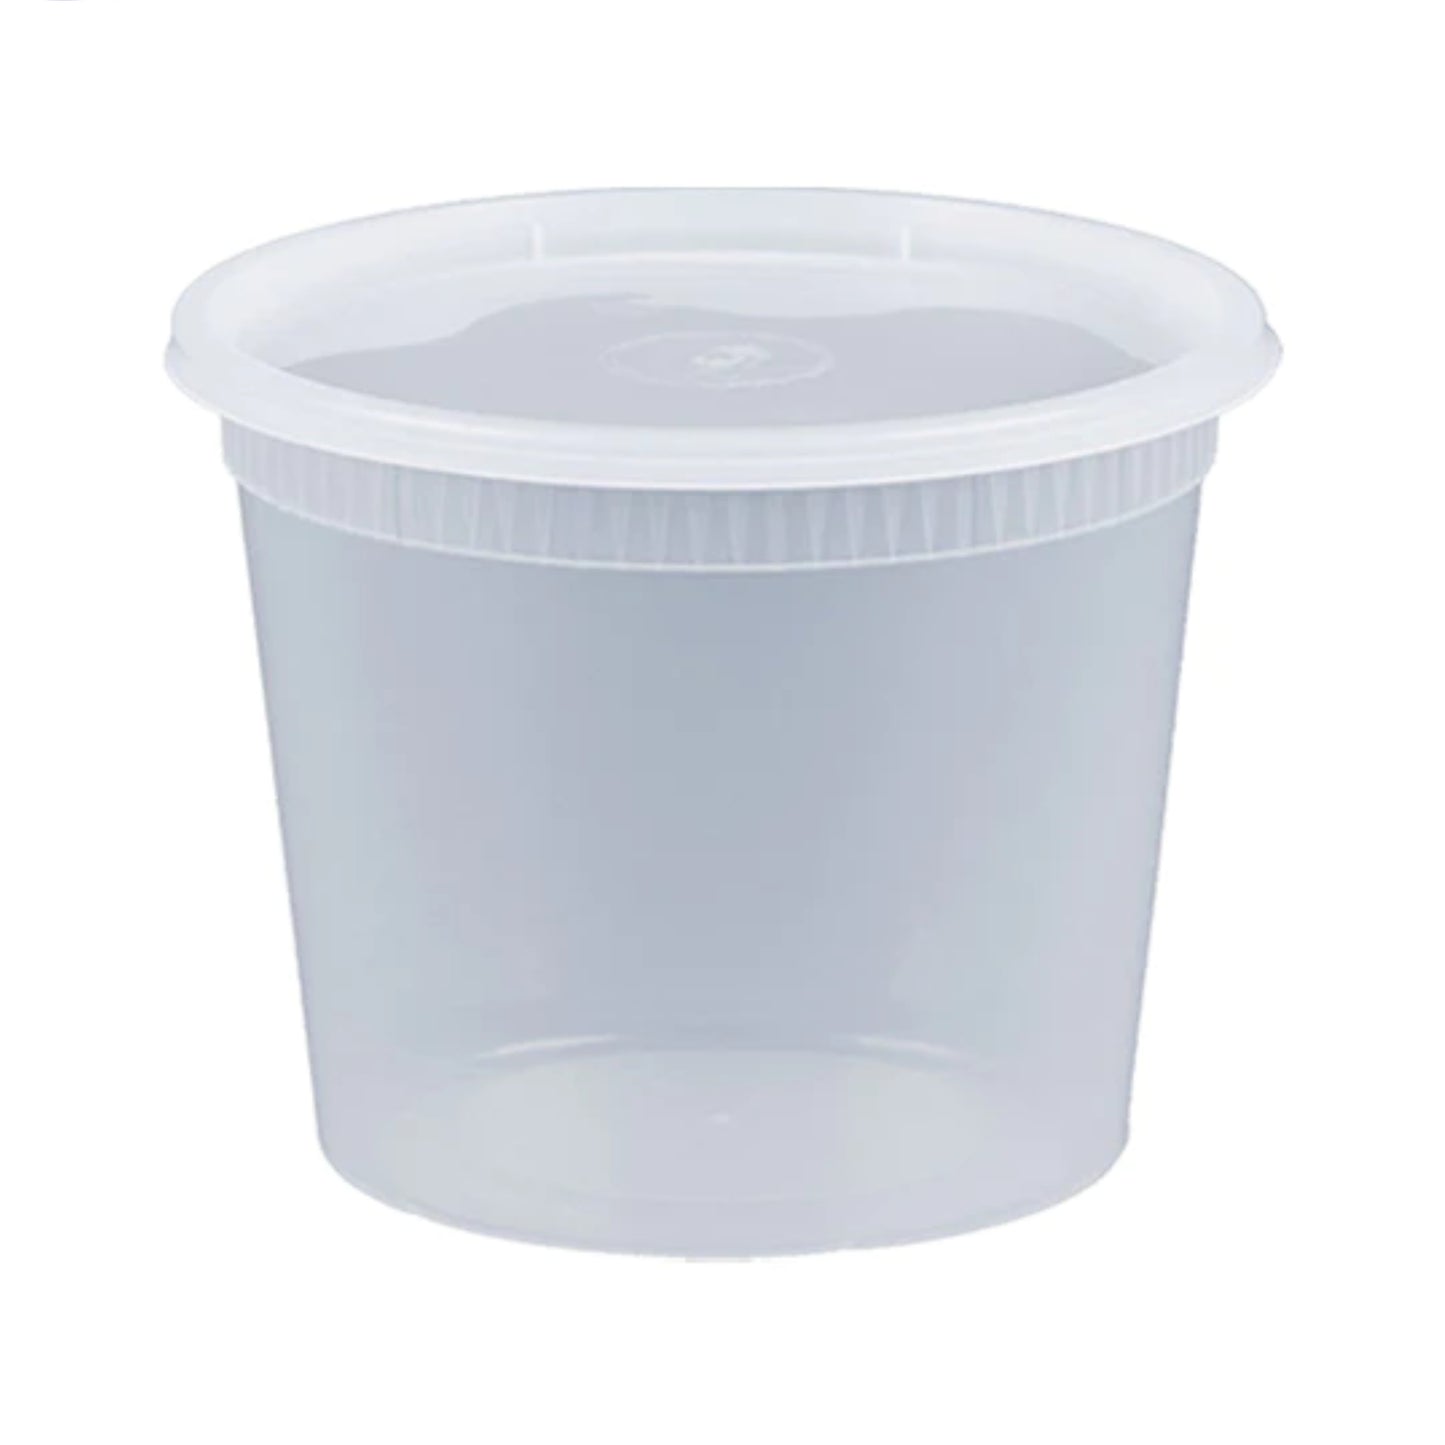 KIS-S20G | 240sets 20oz, 591ml Clear Plastic Deli Containers and Lids Combo; $0.172/set